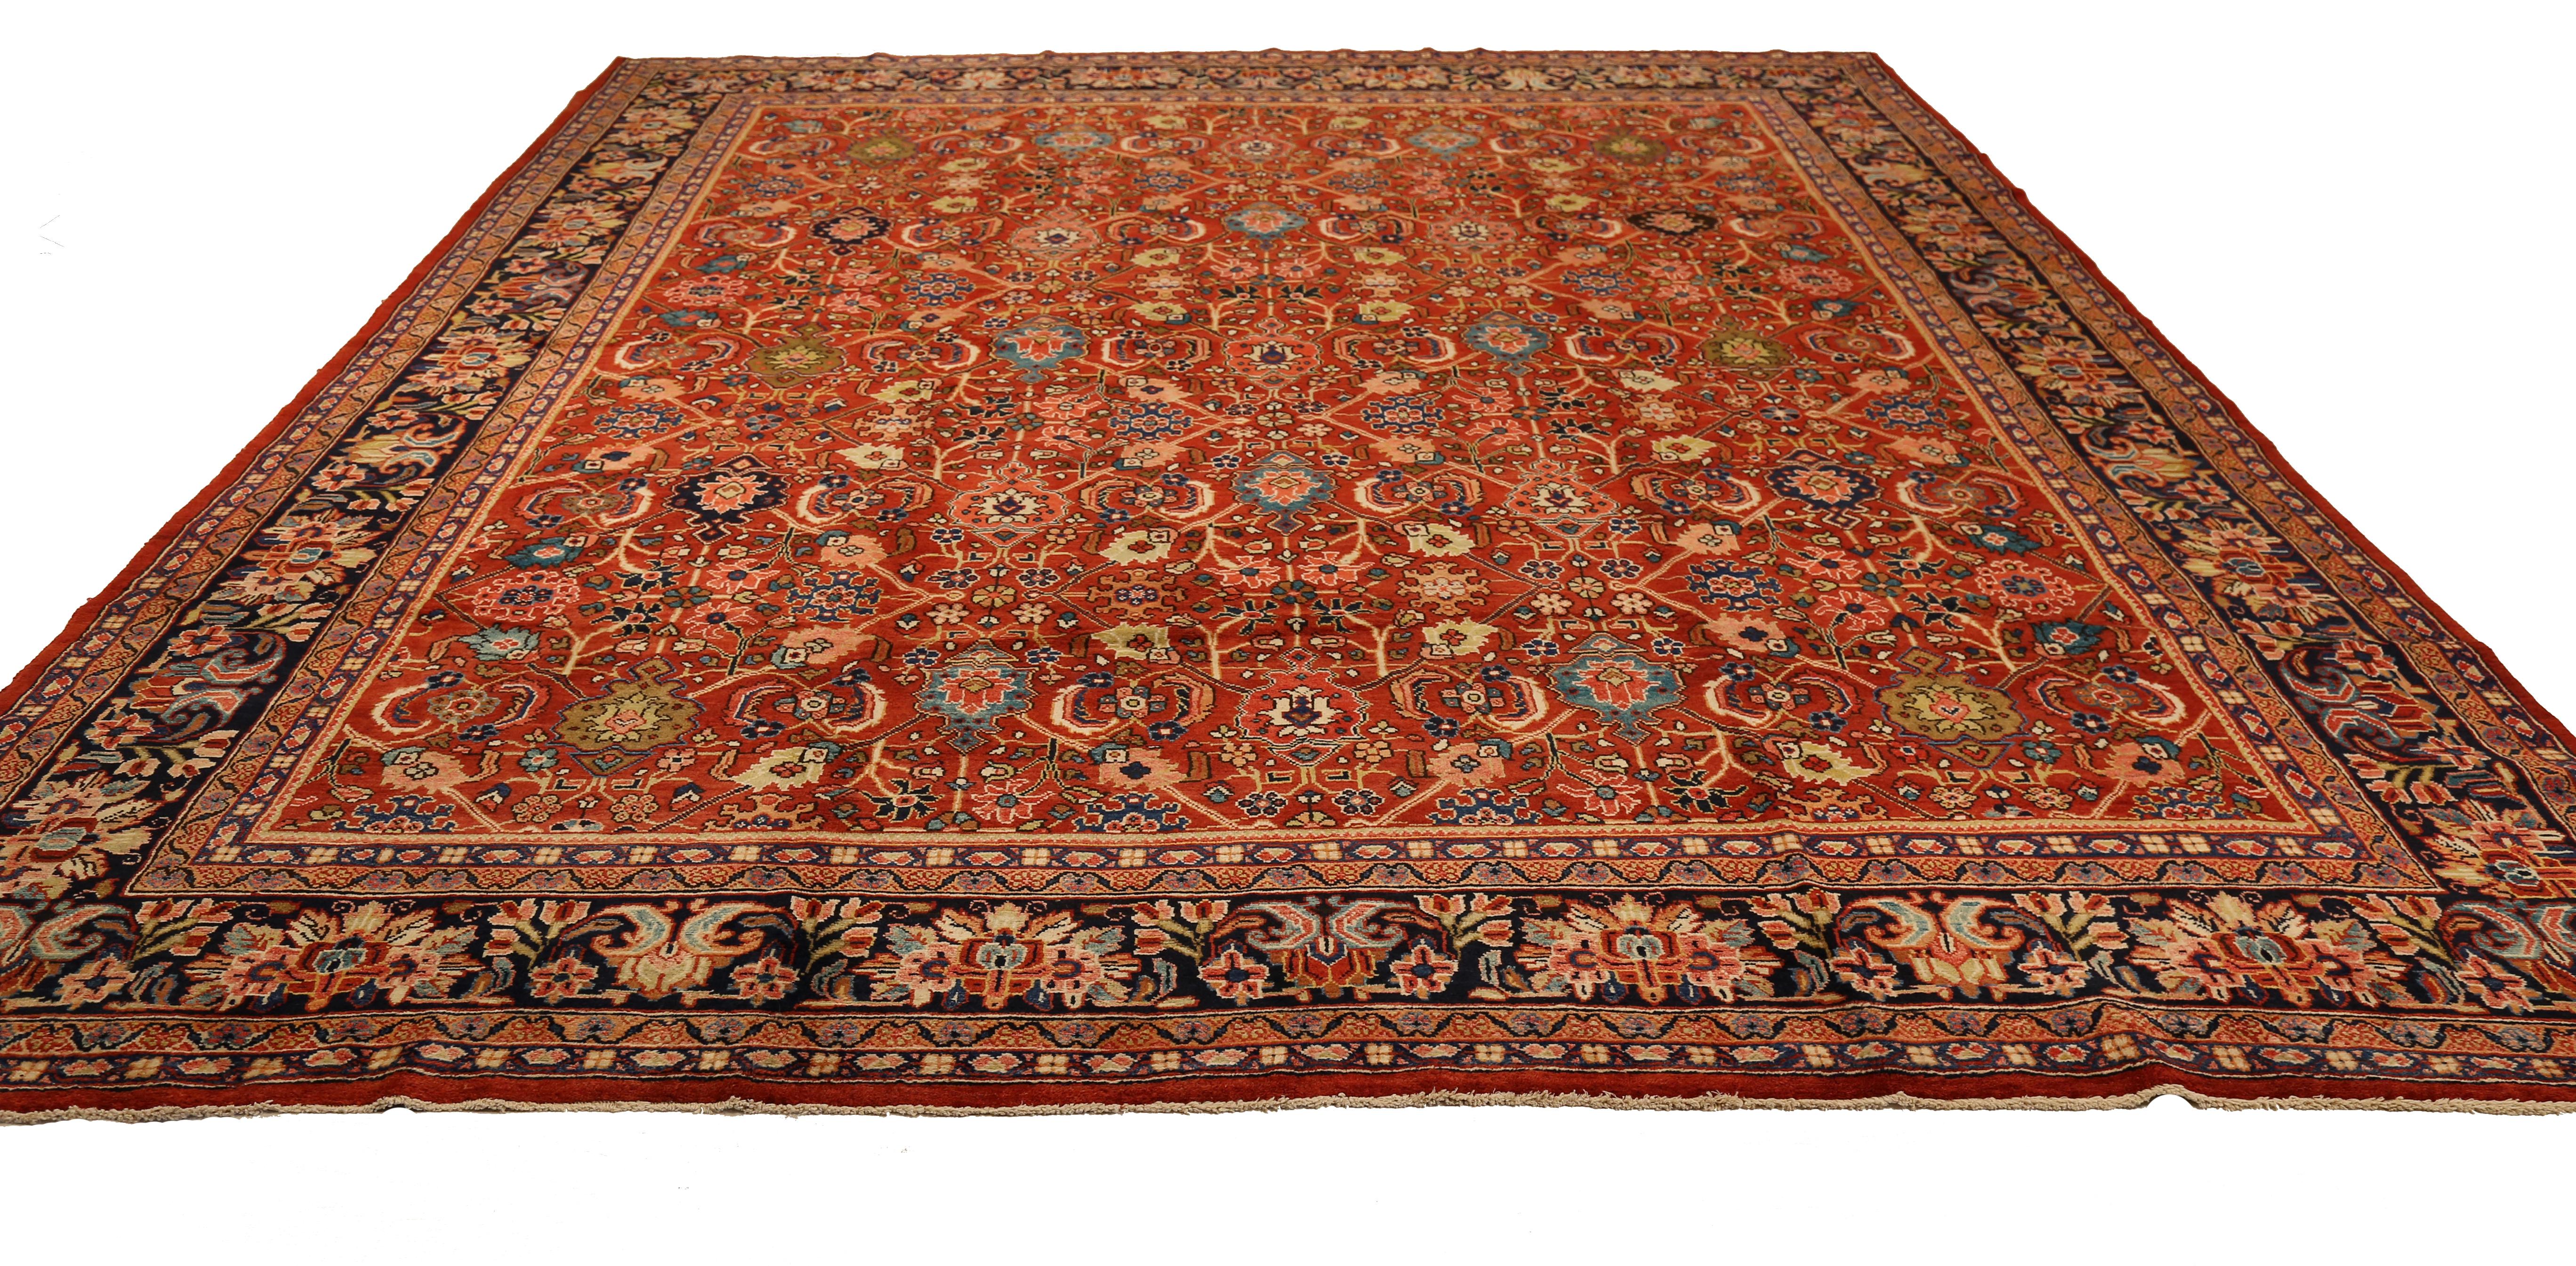 Modern 21st century hand knotted Persian area rug made from fine wool and all-natural vegetable dyes that are safe for people and pets. This beautiful piece features a rich field of floral details in various colors which is the traditional weaving